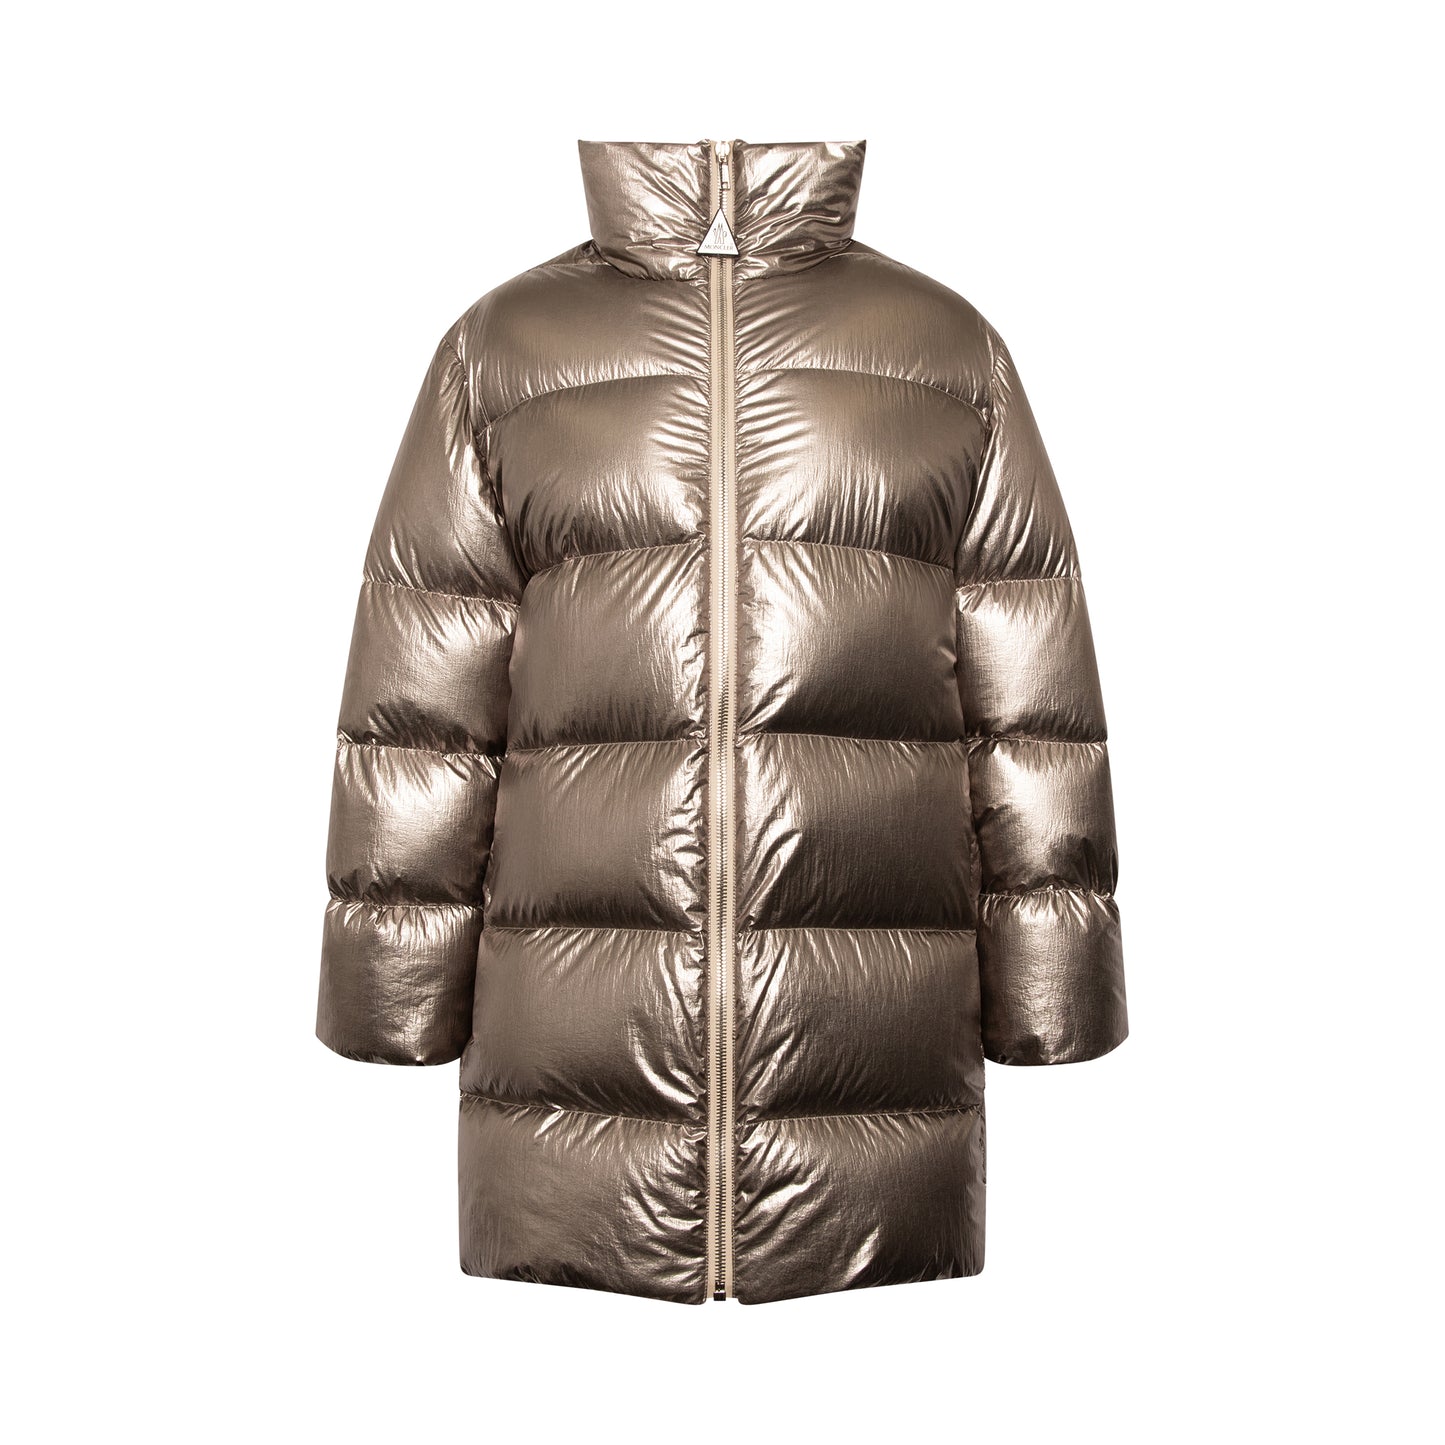 Rick Owens x Moncler Puffer Coat in Silver